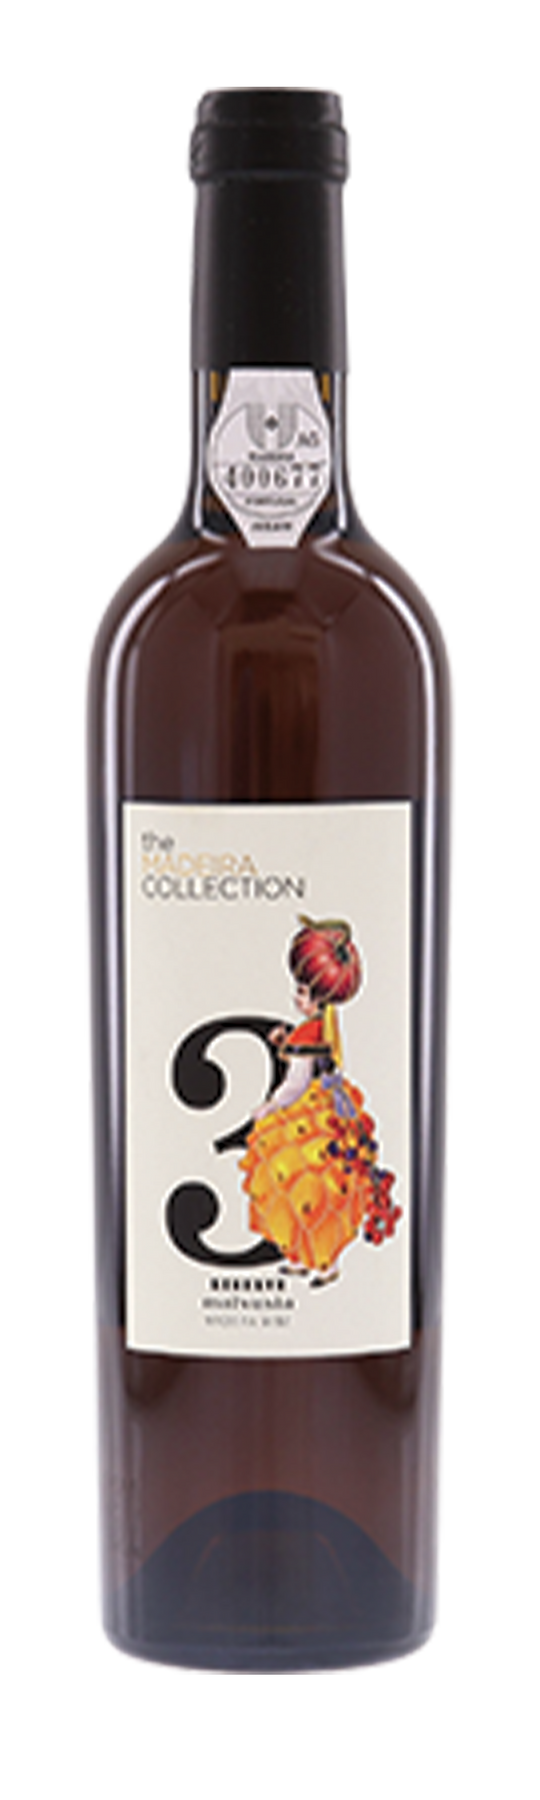 The Madeira Collection #3 20% 50cl